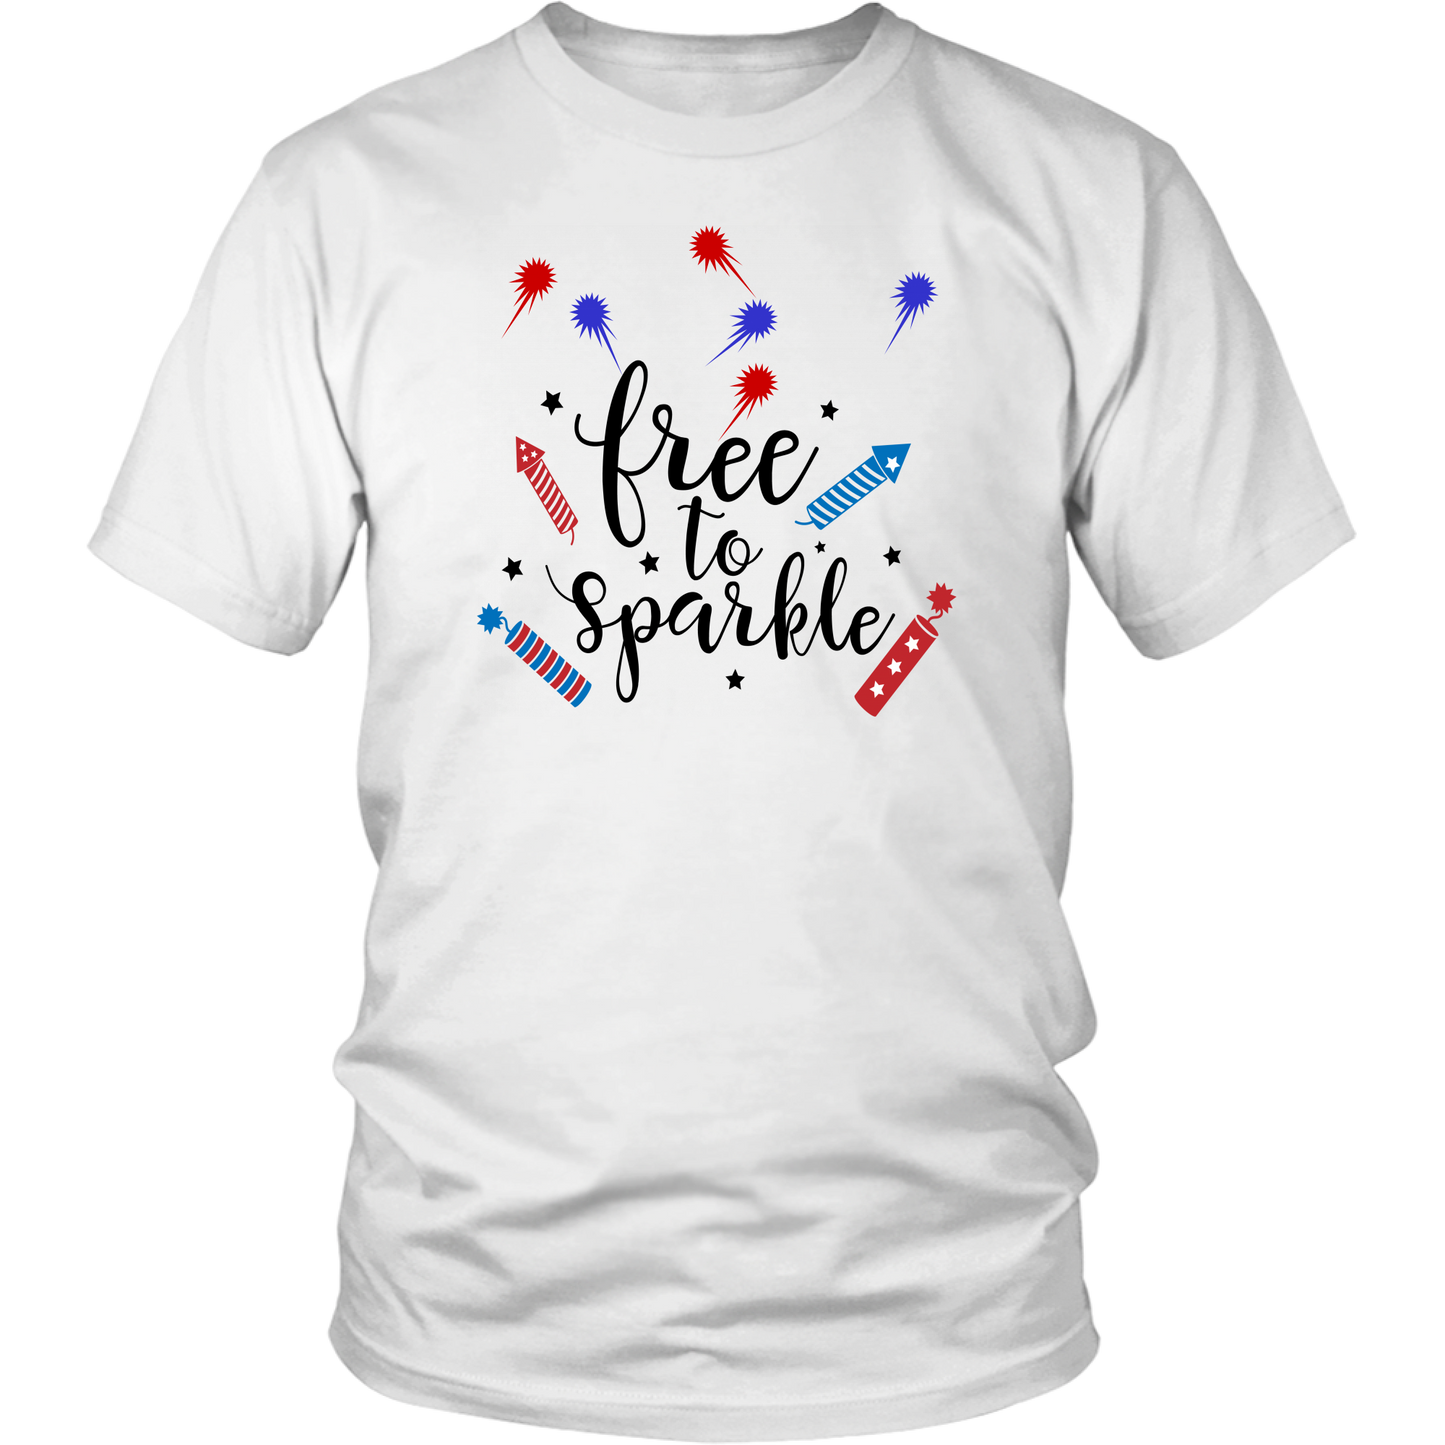 Fourth of July T-Shirts for Women Men Kids Combo set for Mom Dad Child Independence day